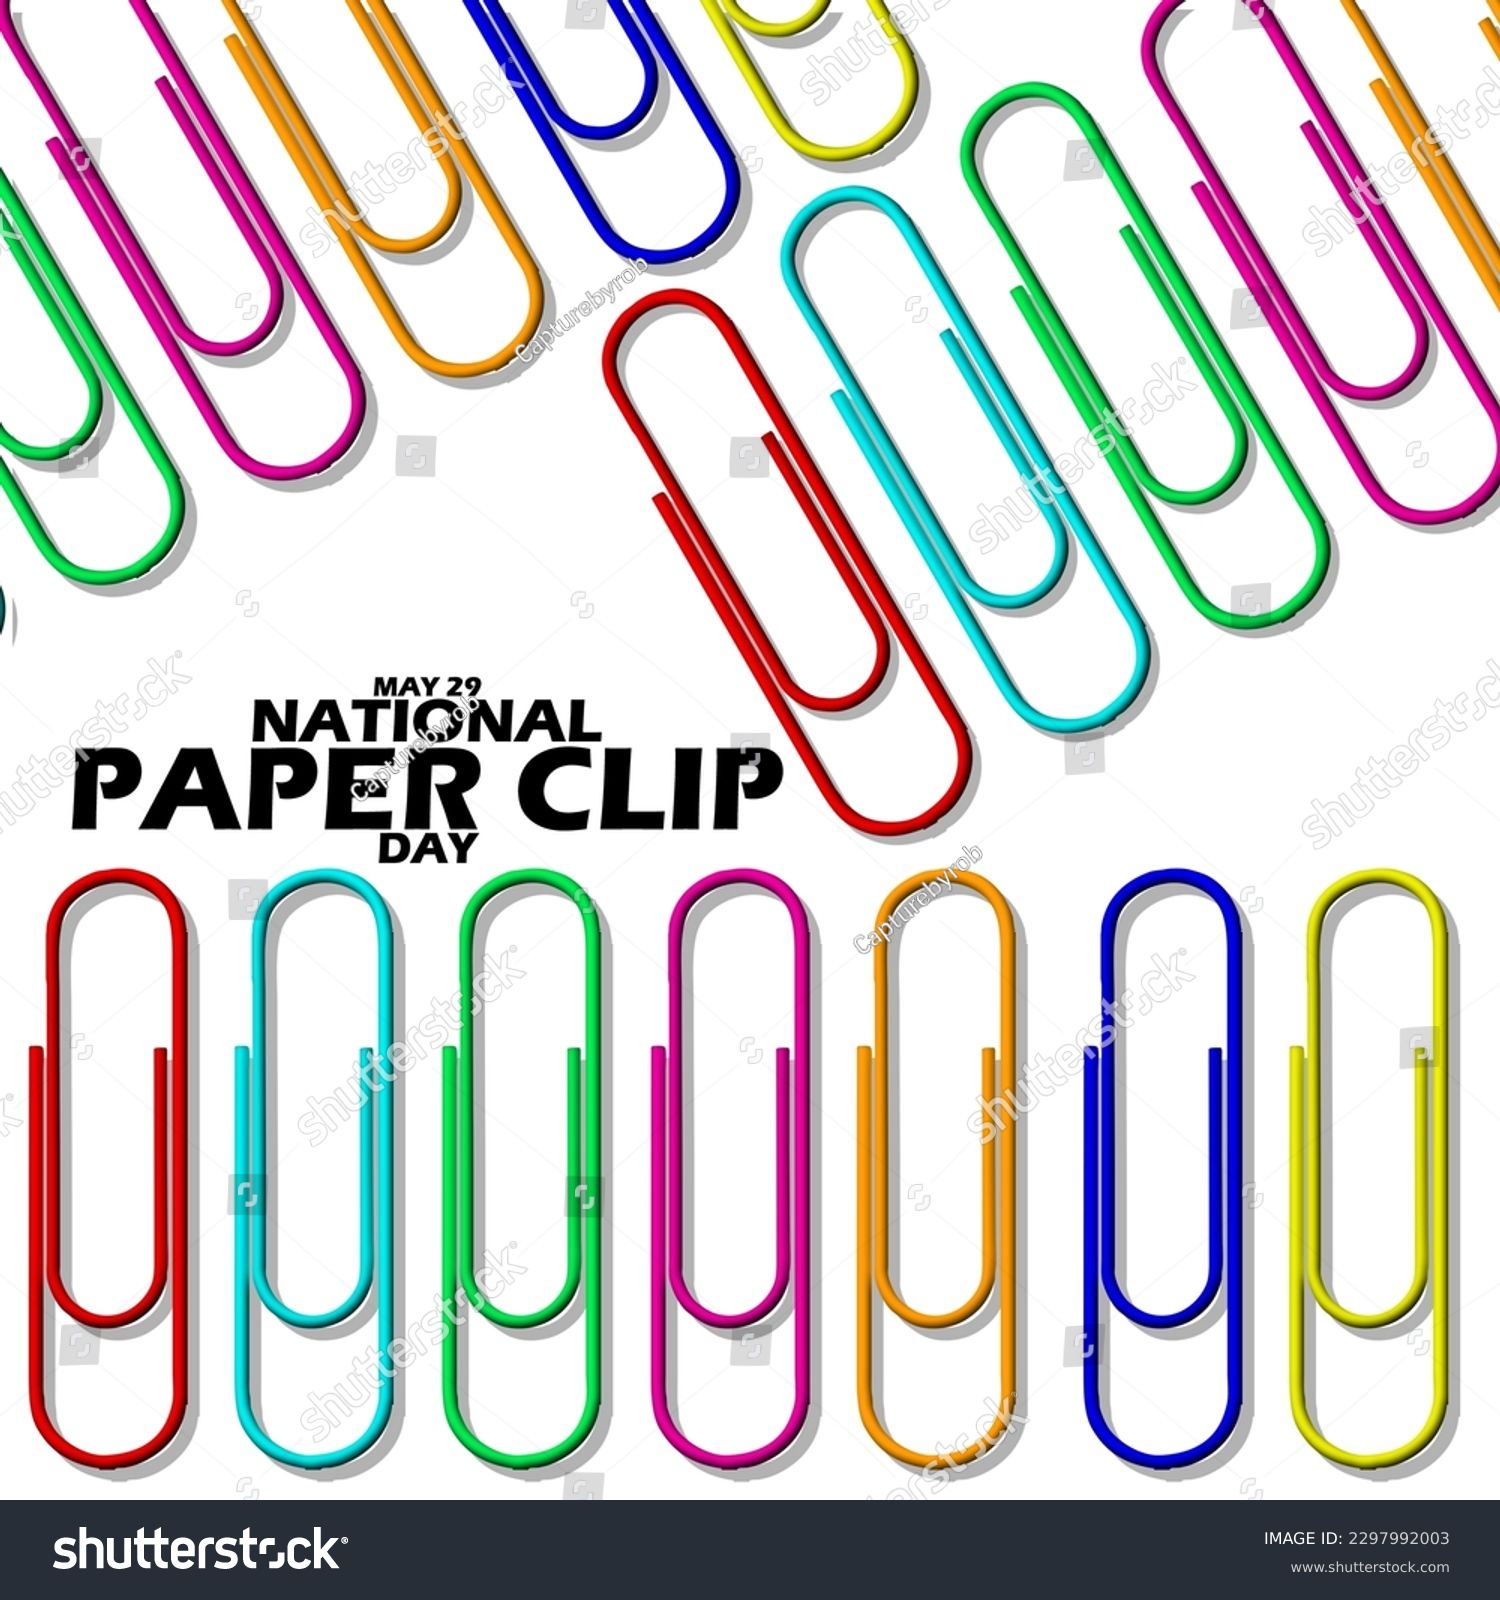 SVG of Colorful paperclips with bold text on white background to celebrate National Paperclip Day on May 29 svg